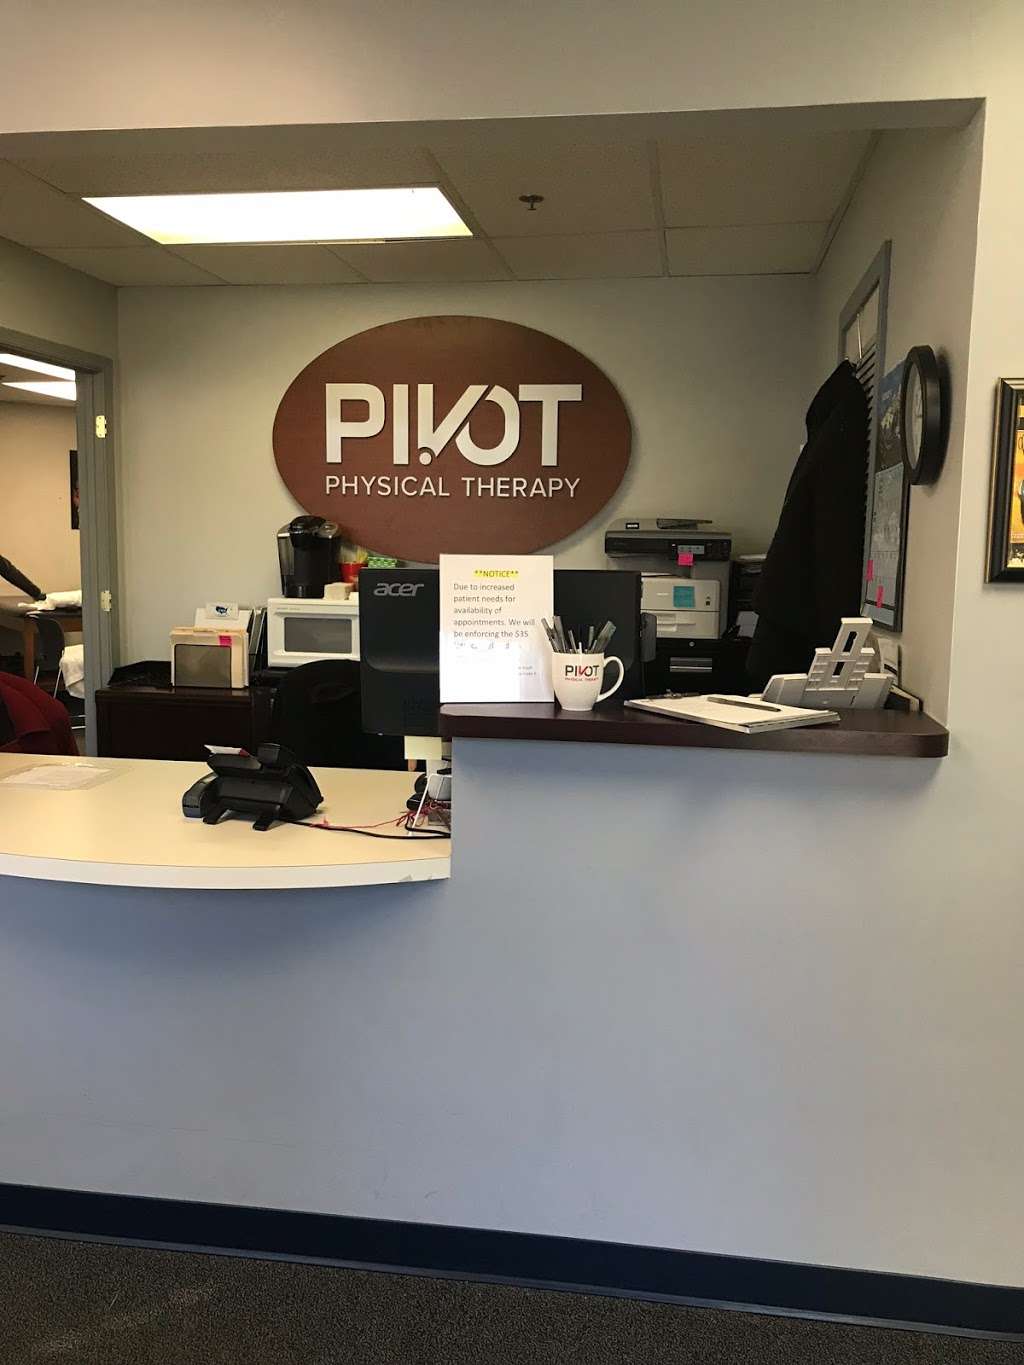 Pivot Physical Therapy | 4367 Northview Dr, Bowie, MD 20716 | Phone: (301) 464-4500